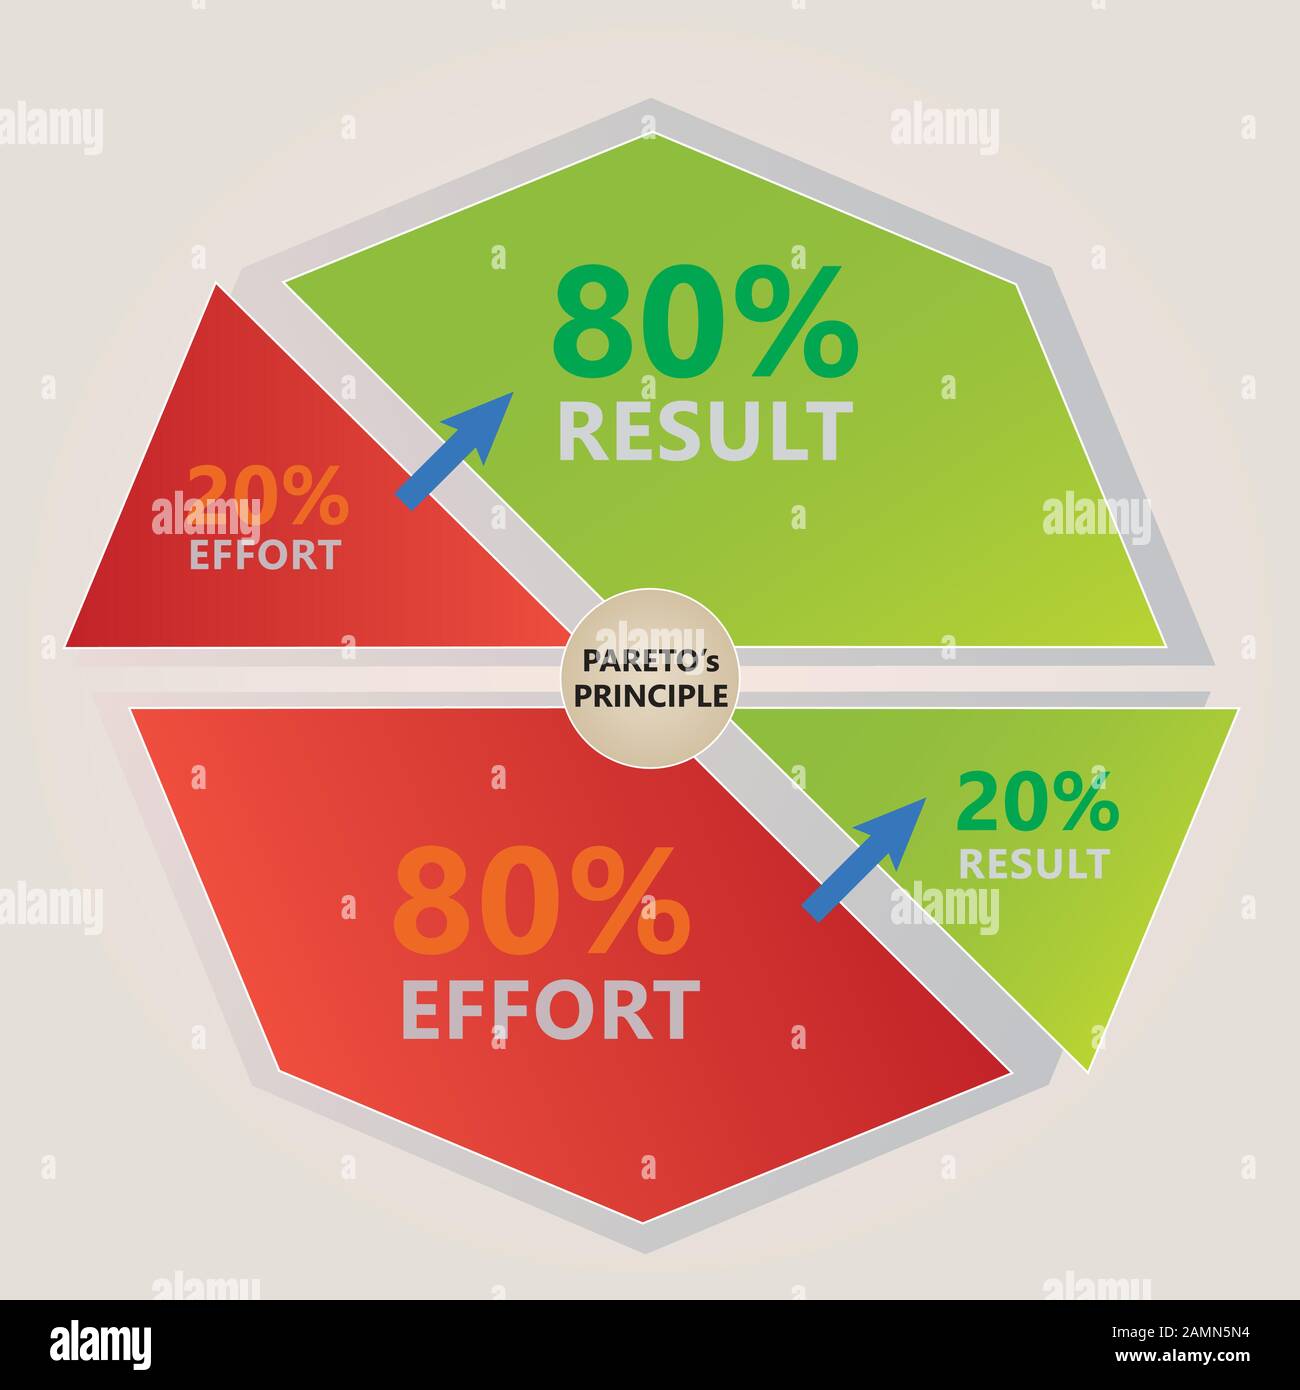 Pareto's Principle Diagram - 80 % effort leads to 20% result - Red and Green Colors Stock Vector